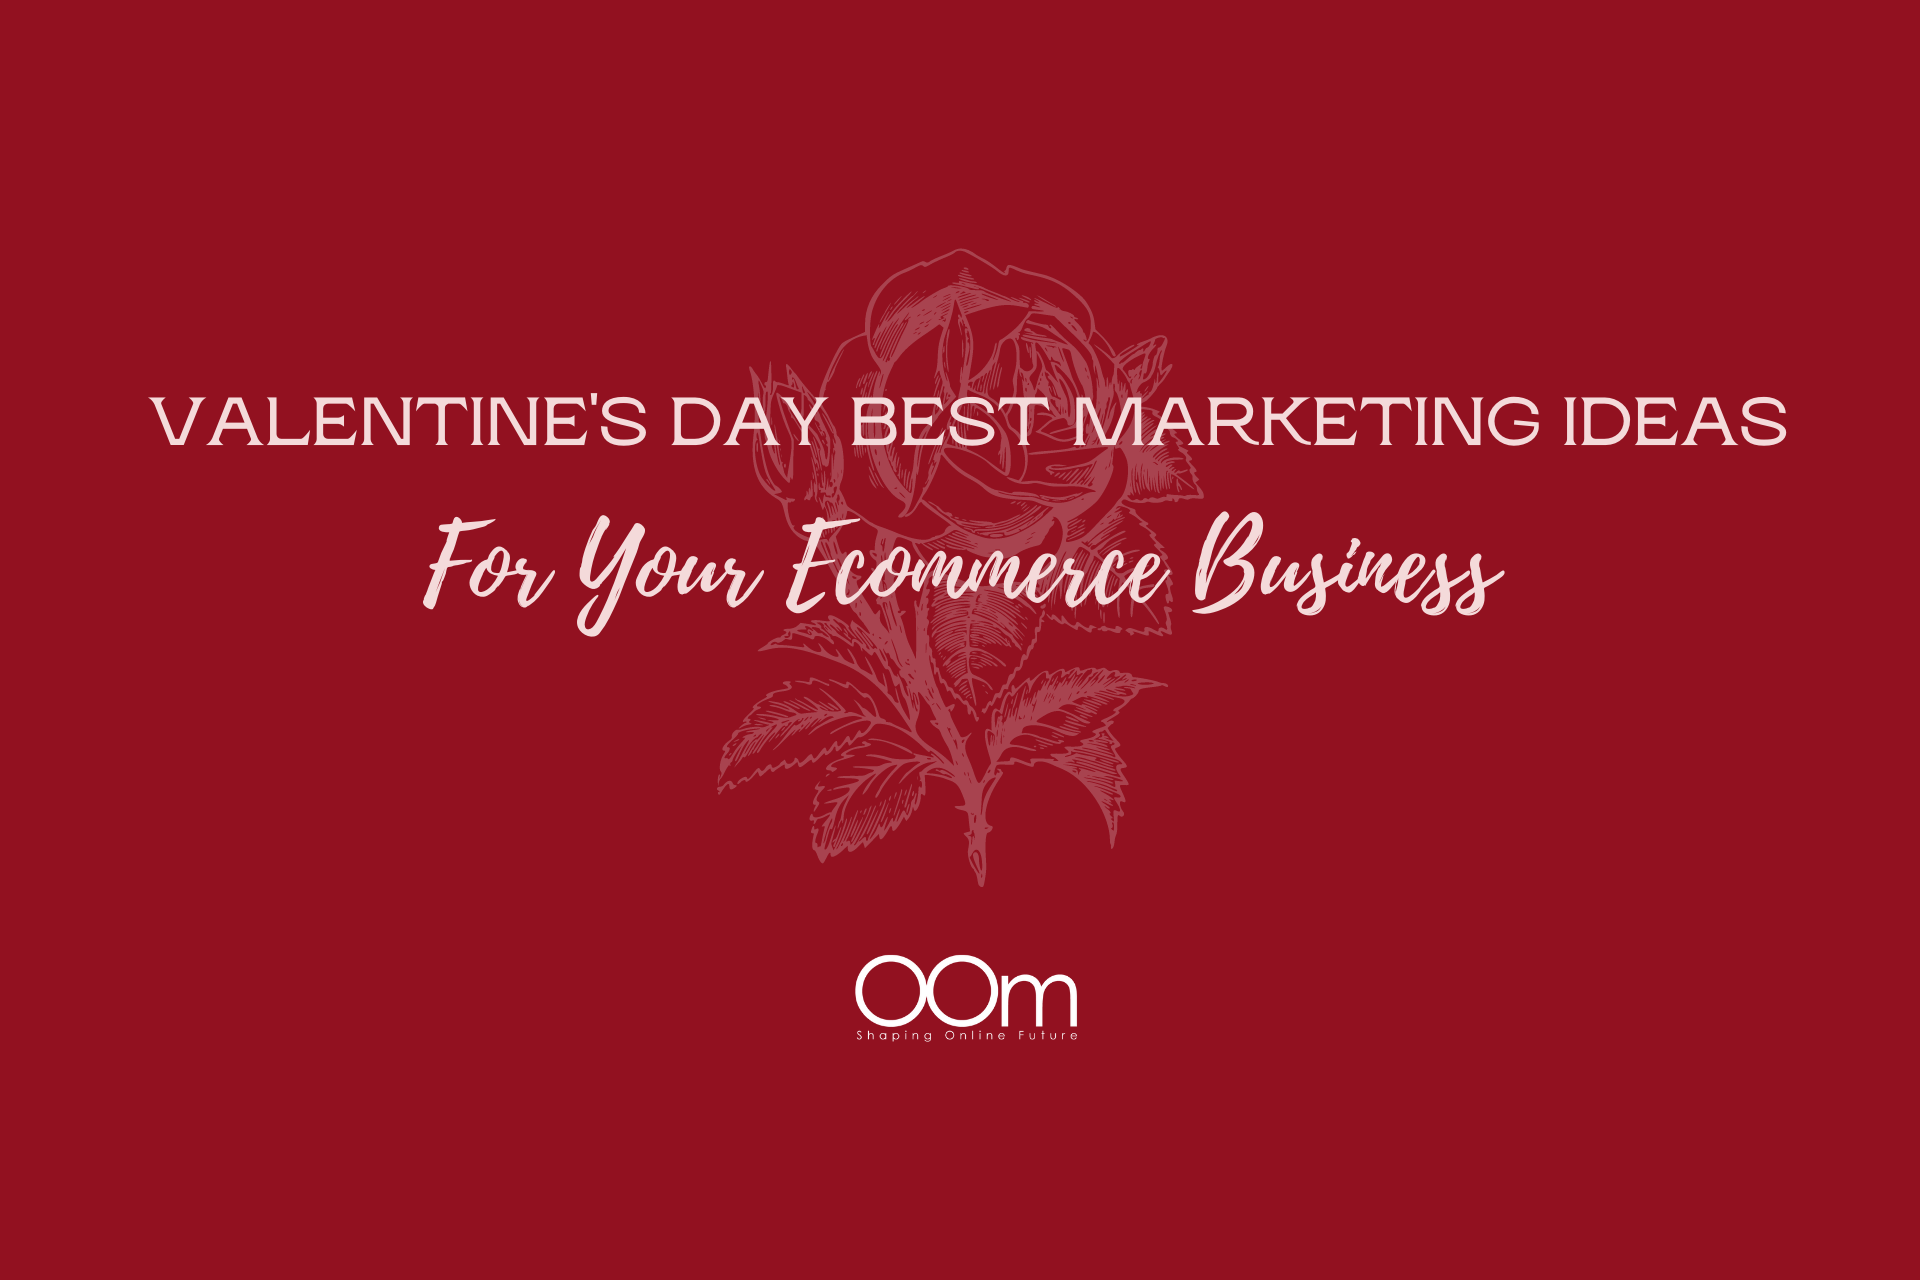 Valentines Day Best Marketing Ideas For Your Ecommerce Business